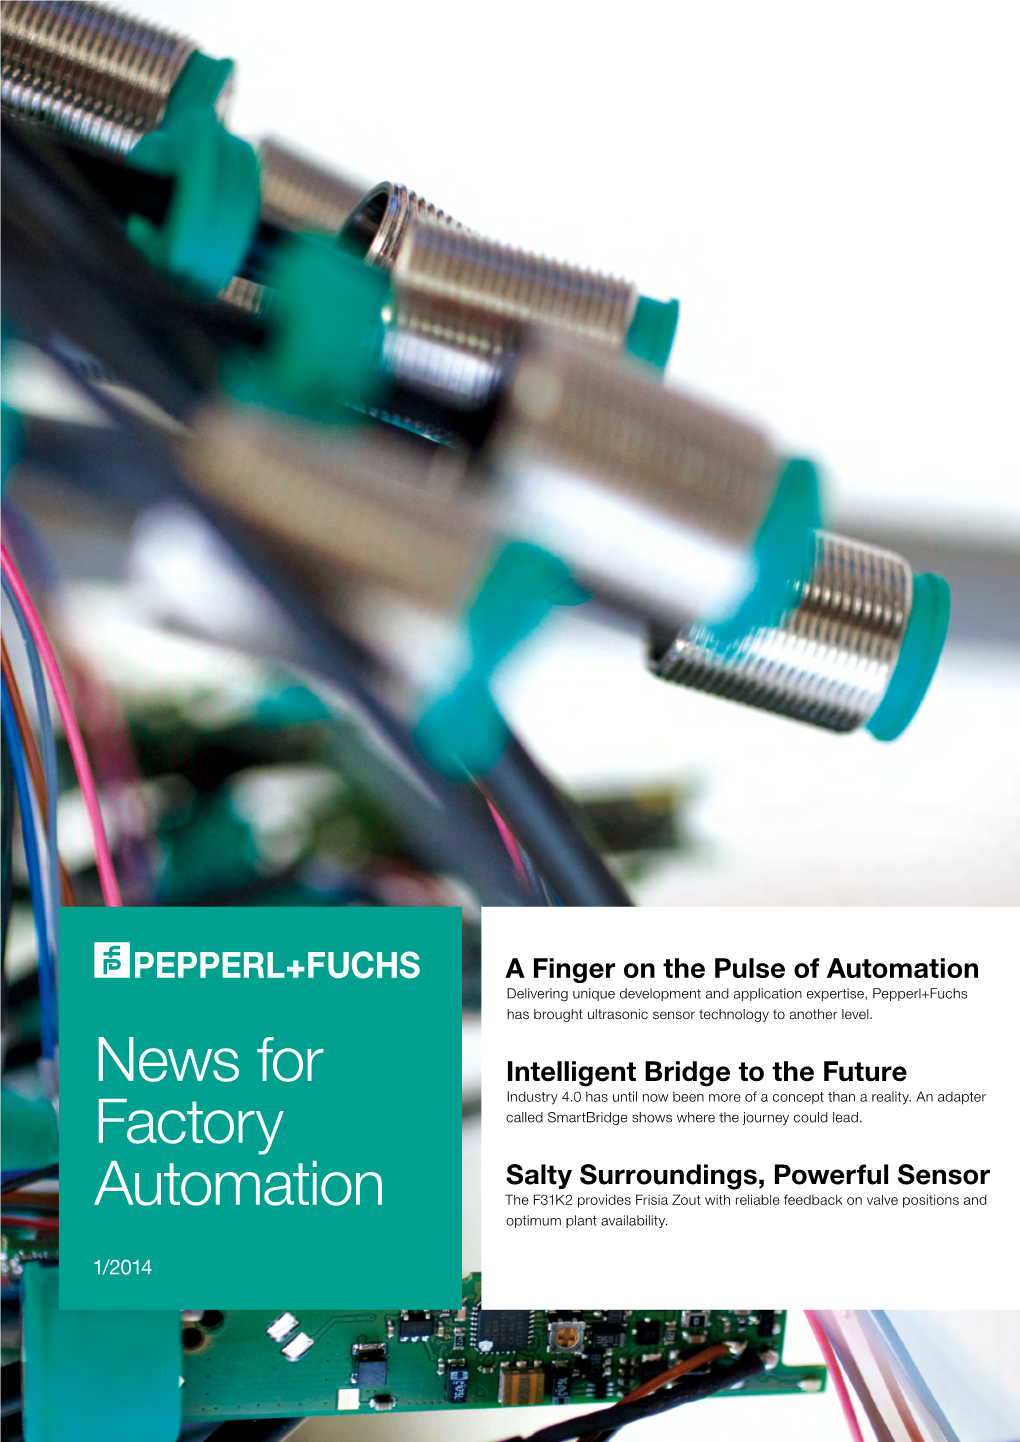 News for Factory Automation 1/2014 Editorial